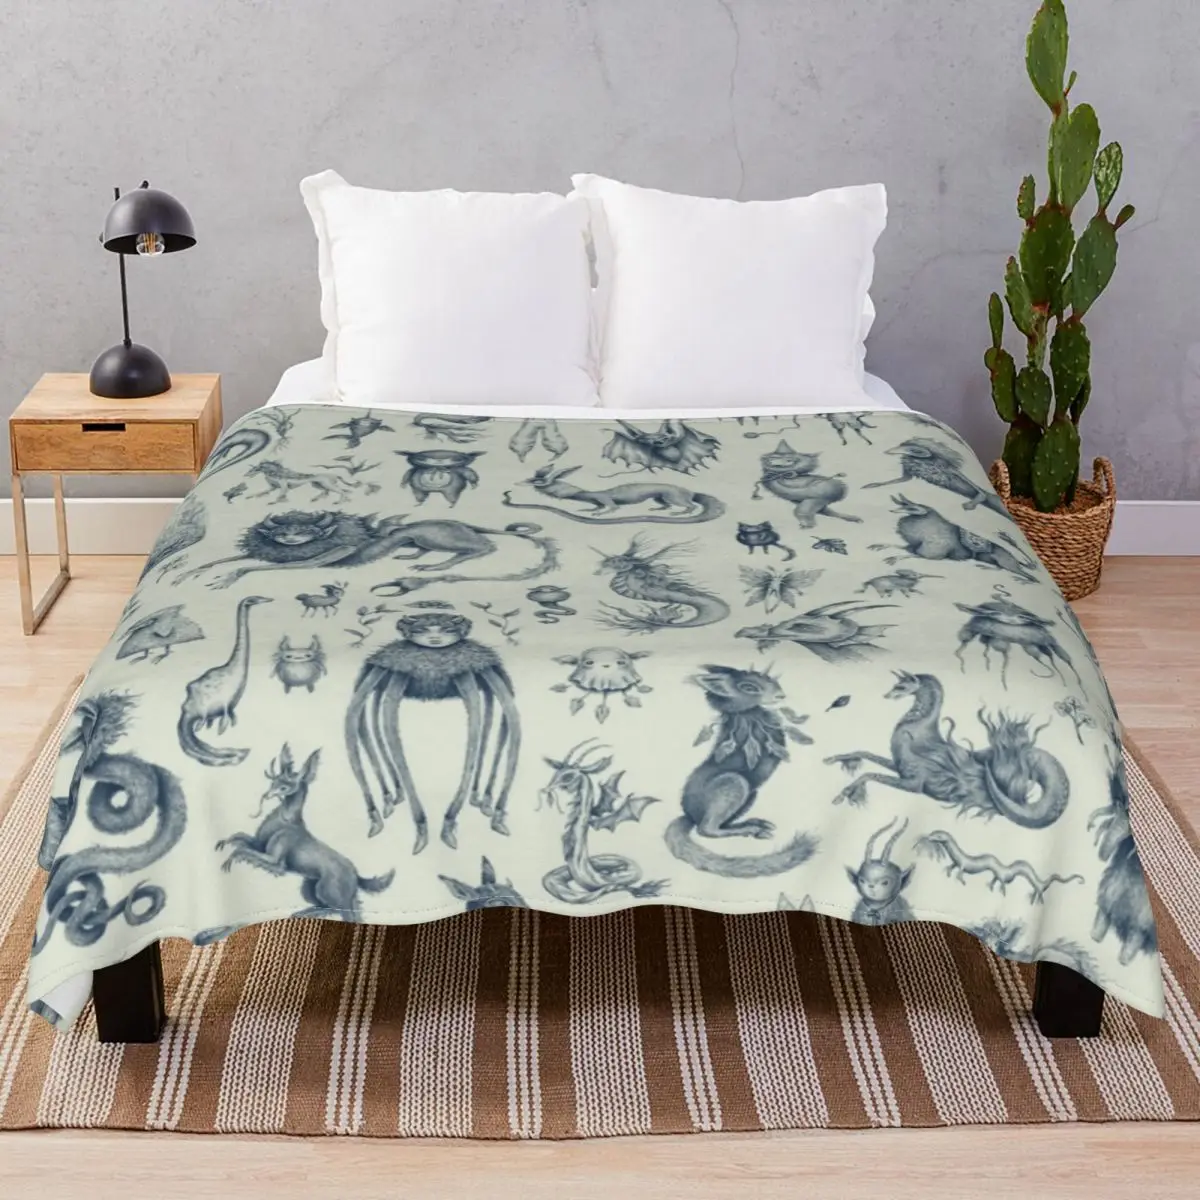 Beings And Creatures Blanket Fleece Printed Comfortable Throw Blankets for Bedding Sofa Camp Cinema